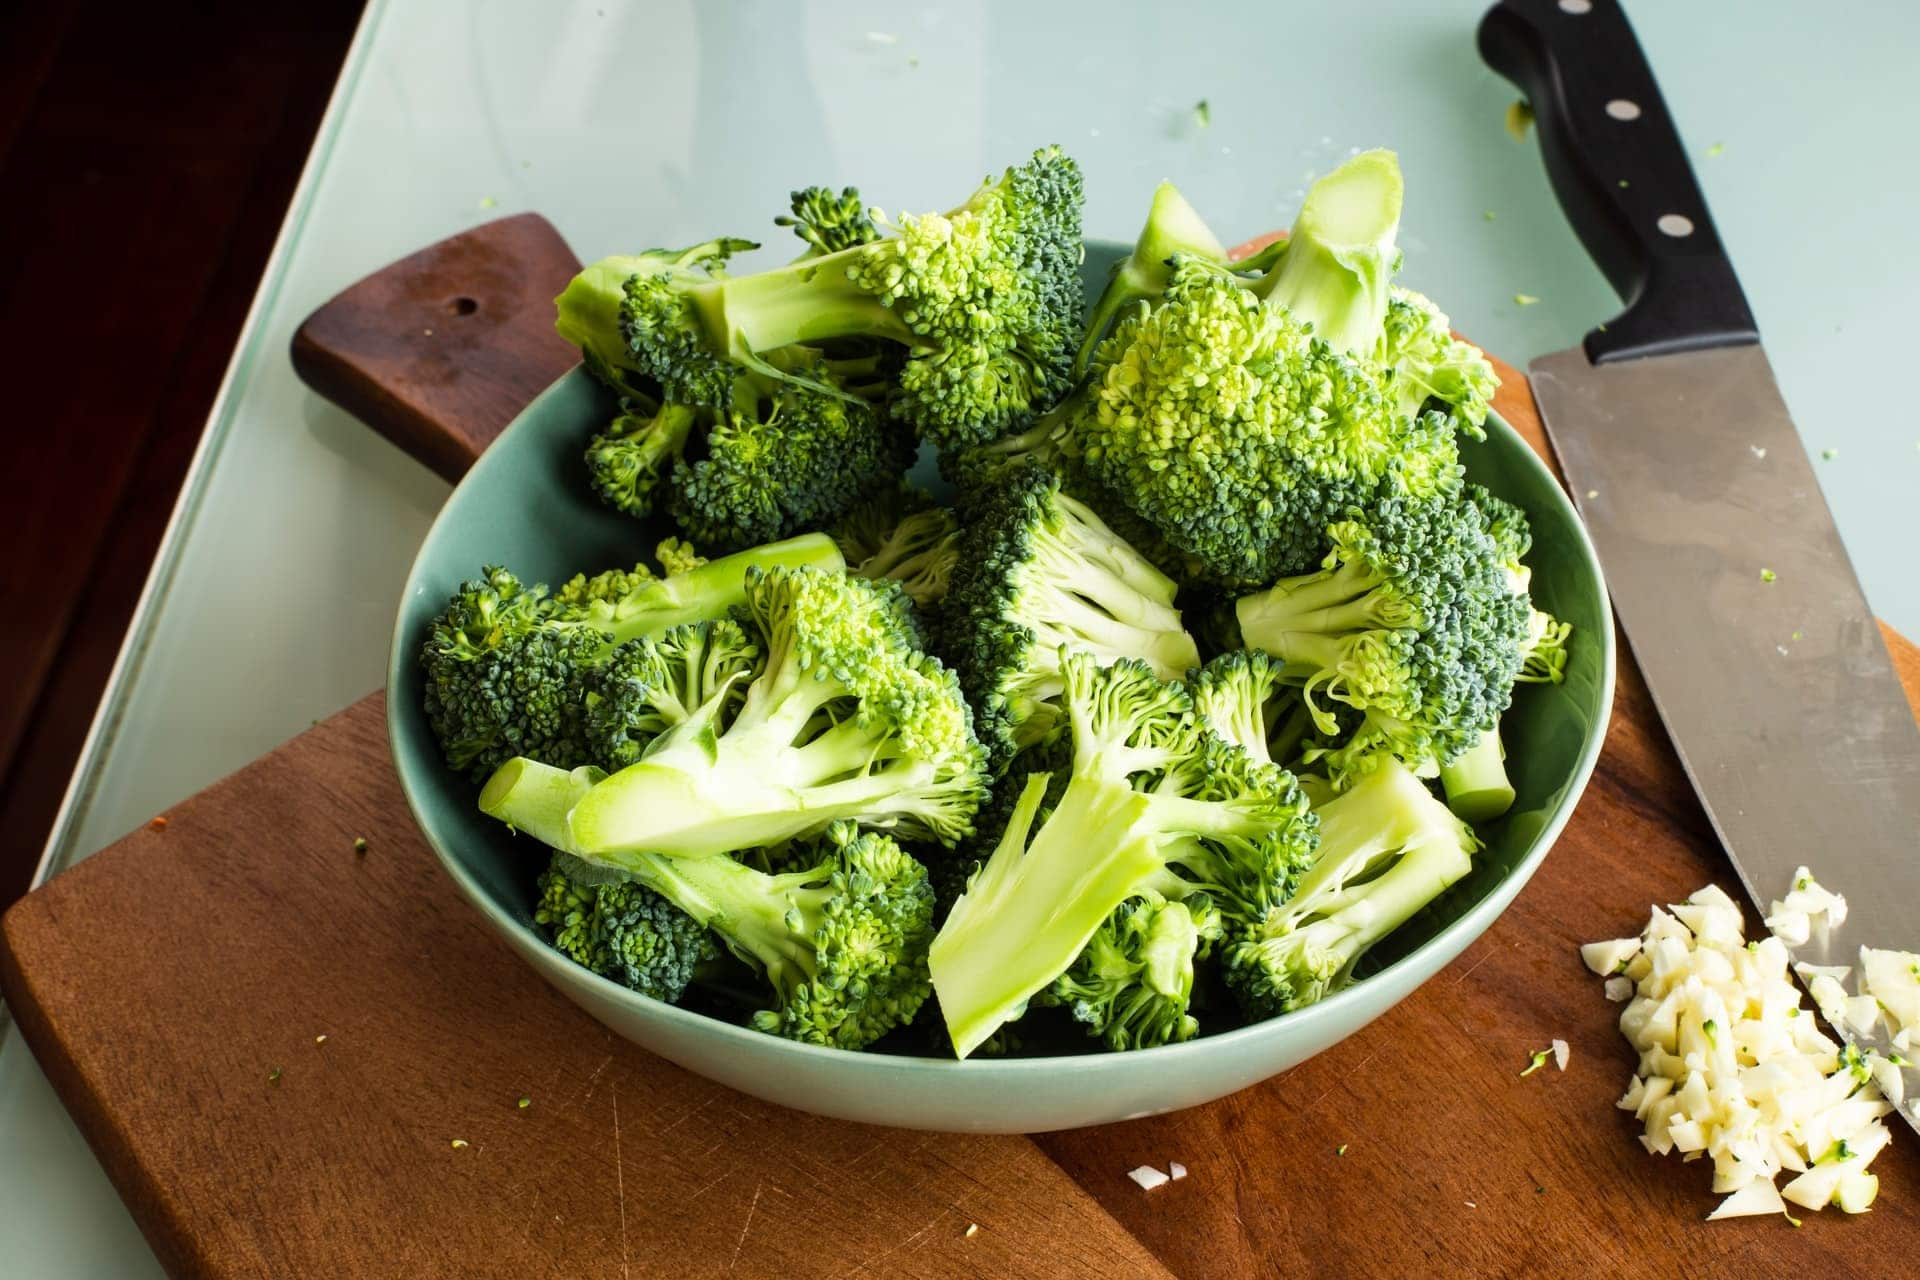 cut-up broccoli in a bowl on a wooden cutting board